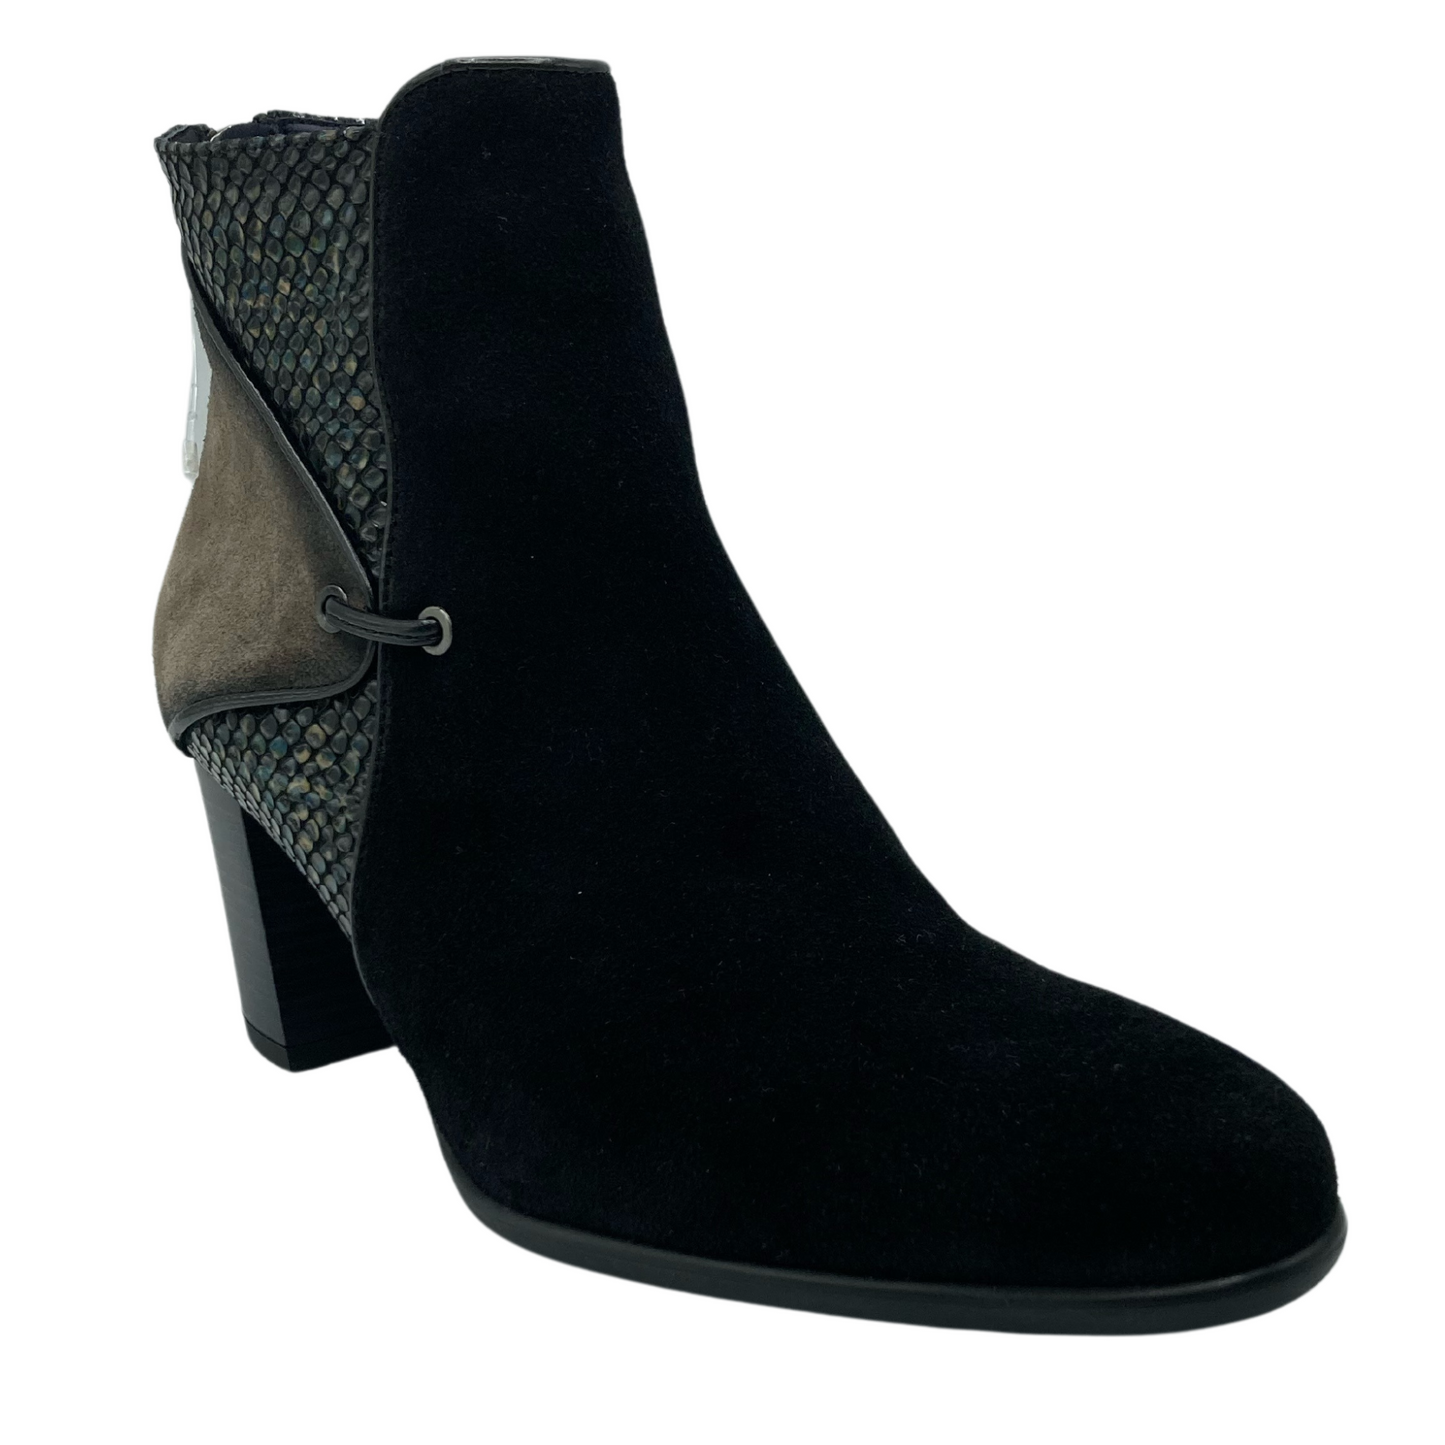 45 degree angled view of black suede ankle boot with scale detail on the ankle